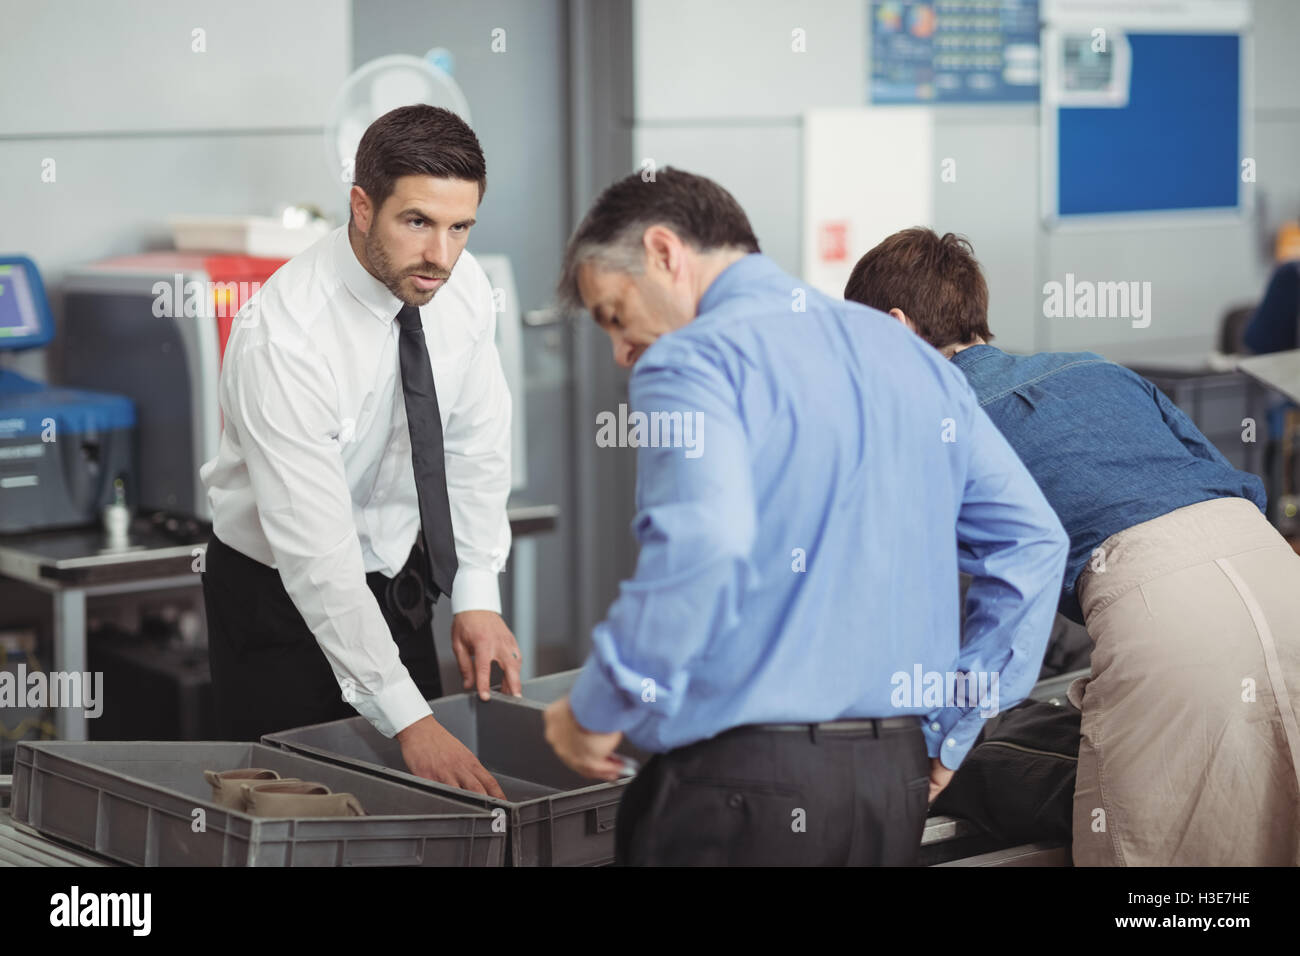 Passengers in security check Stock Photo